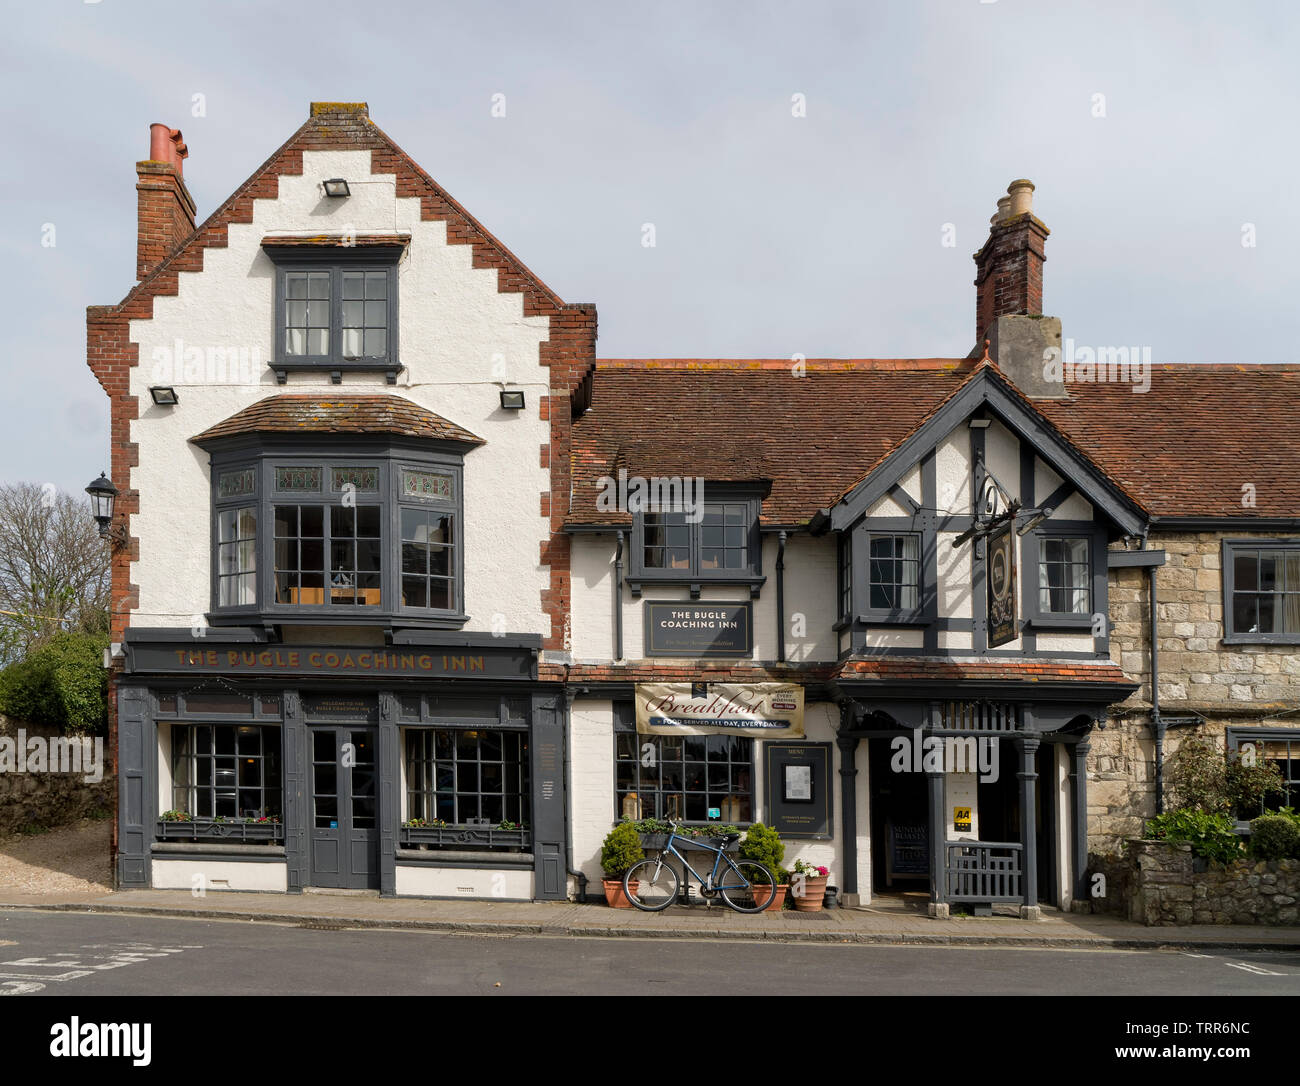 The Bugle Coaching Inn a traditional English pub at Yarmouth on the Isle of Wight Stock Photo